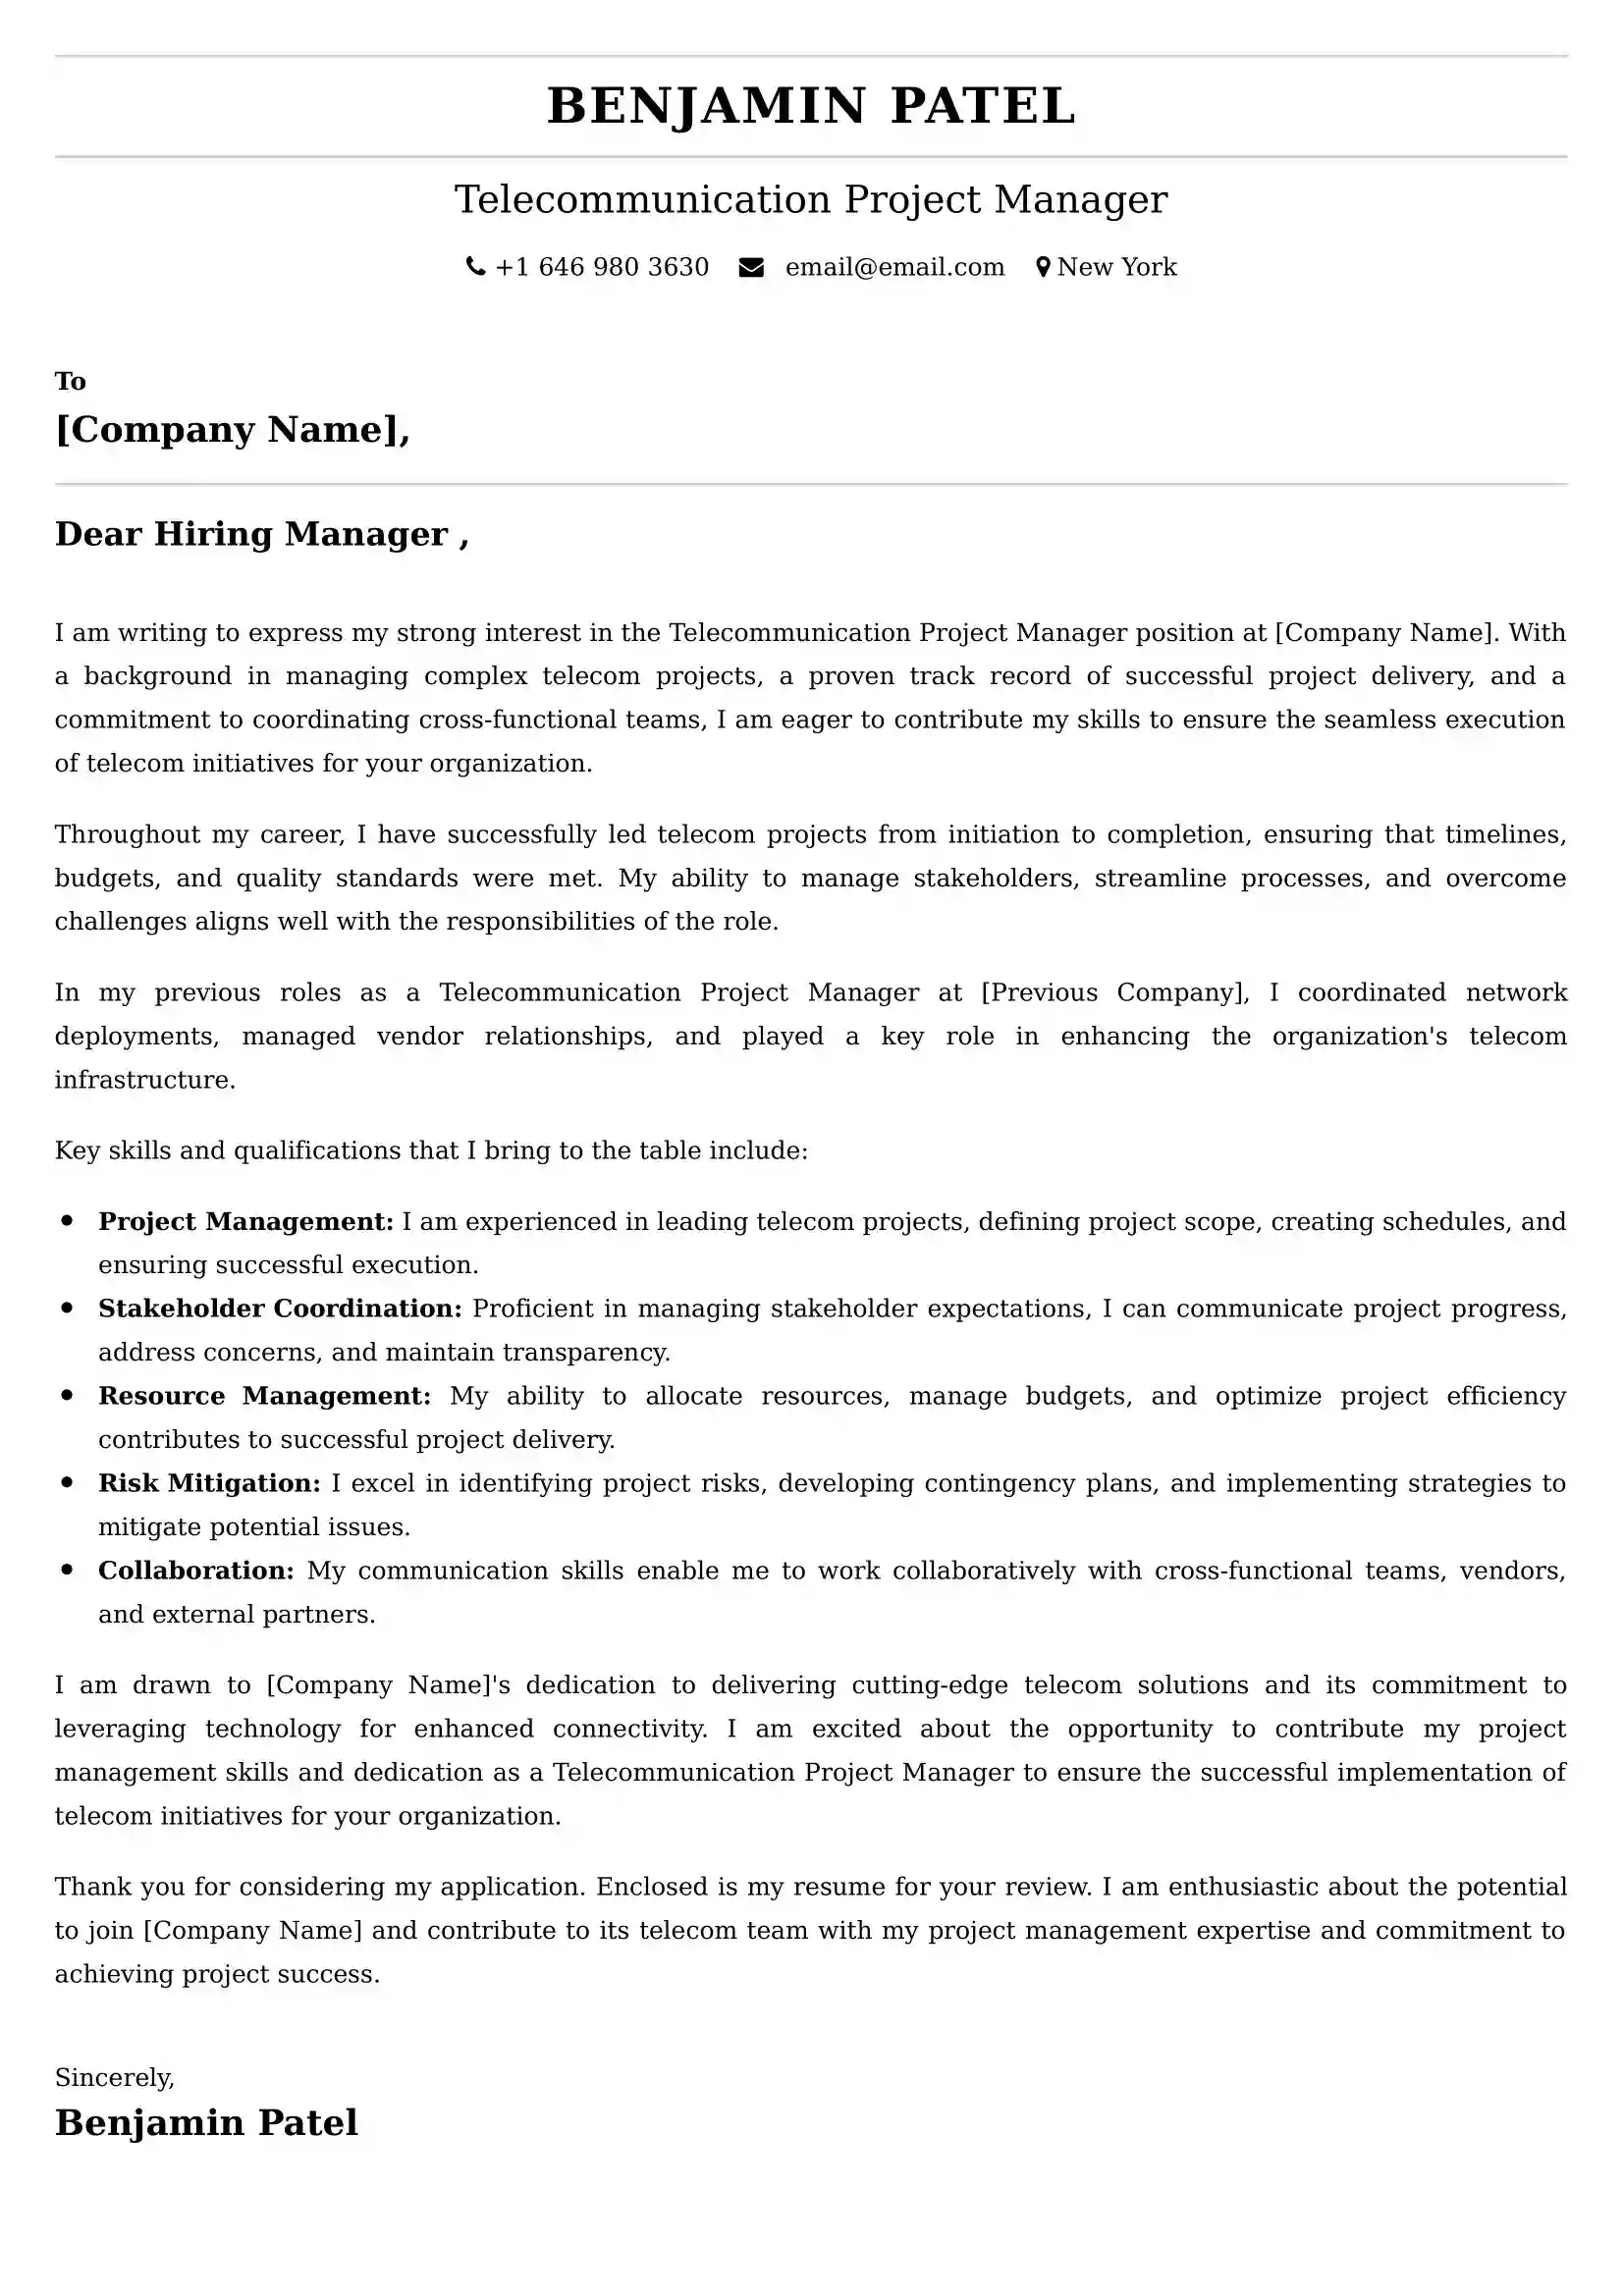 Telecommunication Project Manager Cover Letter Sample